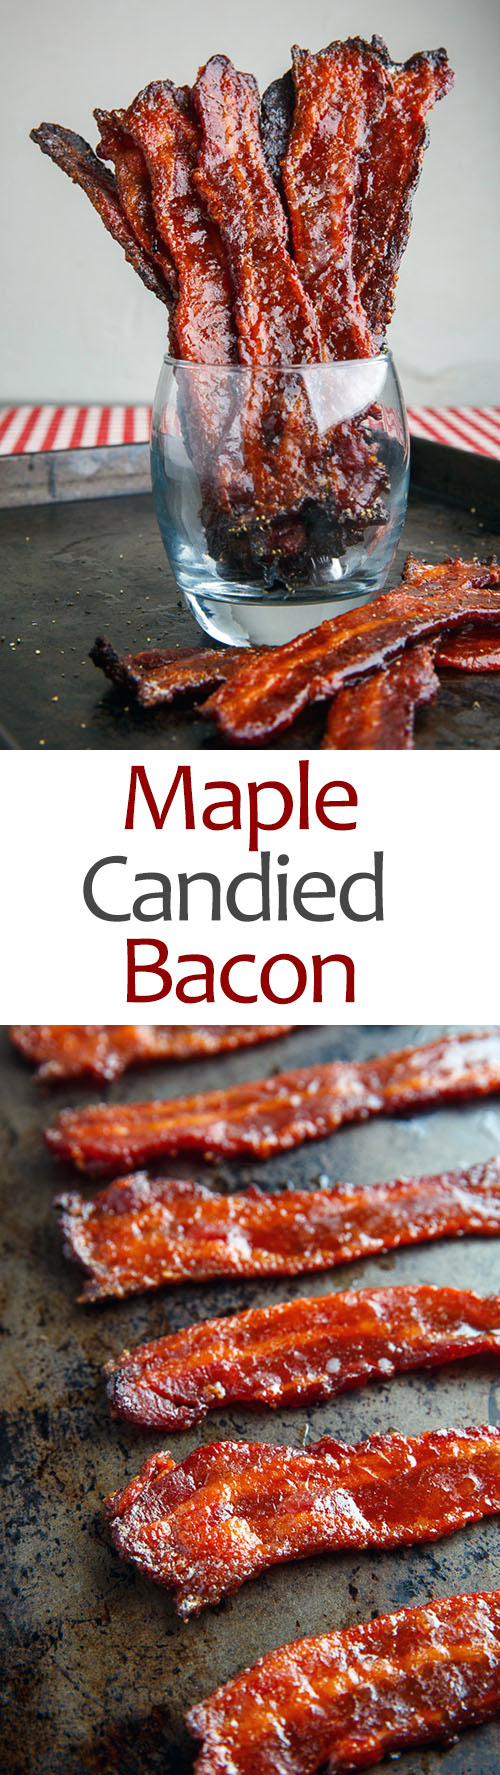 Maple Candied Bacon